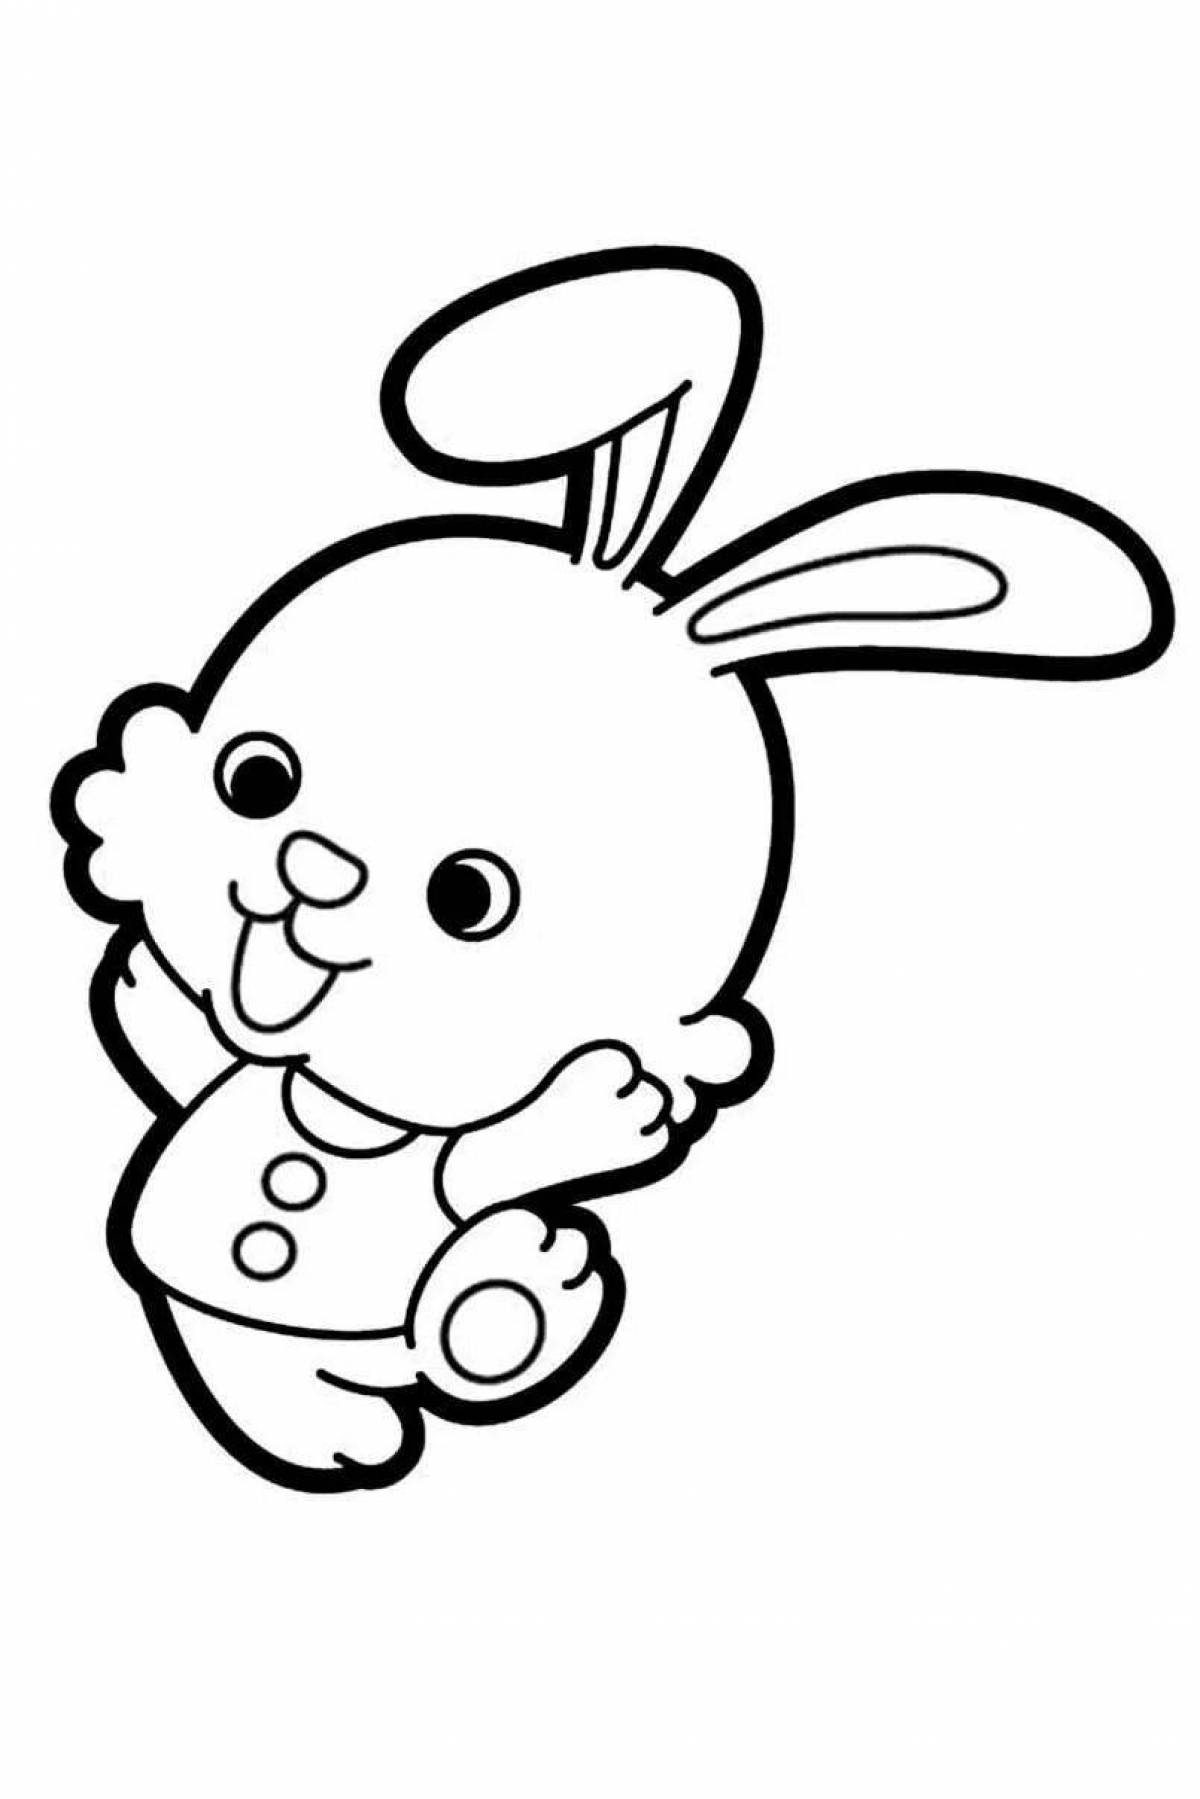 Adorable bunny drawing coloring book